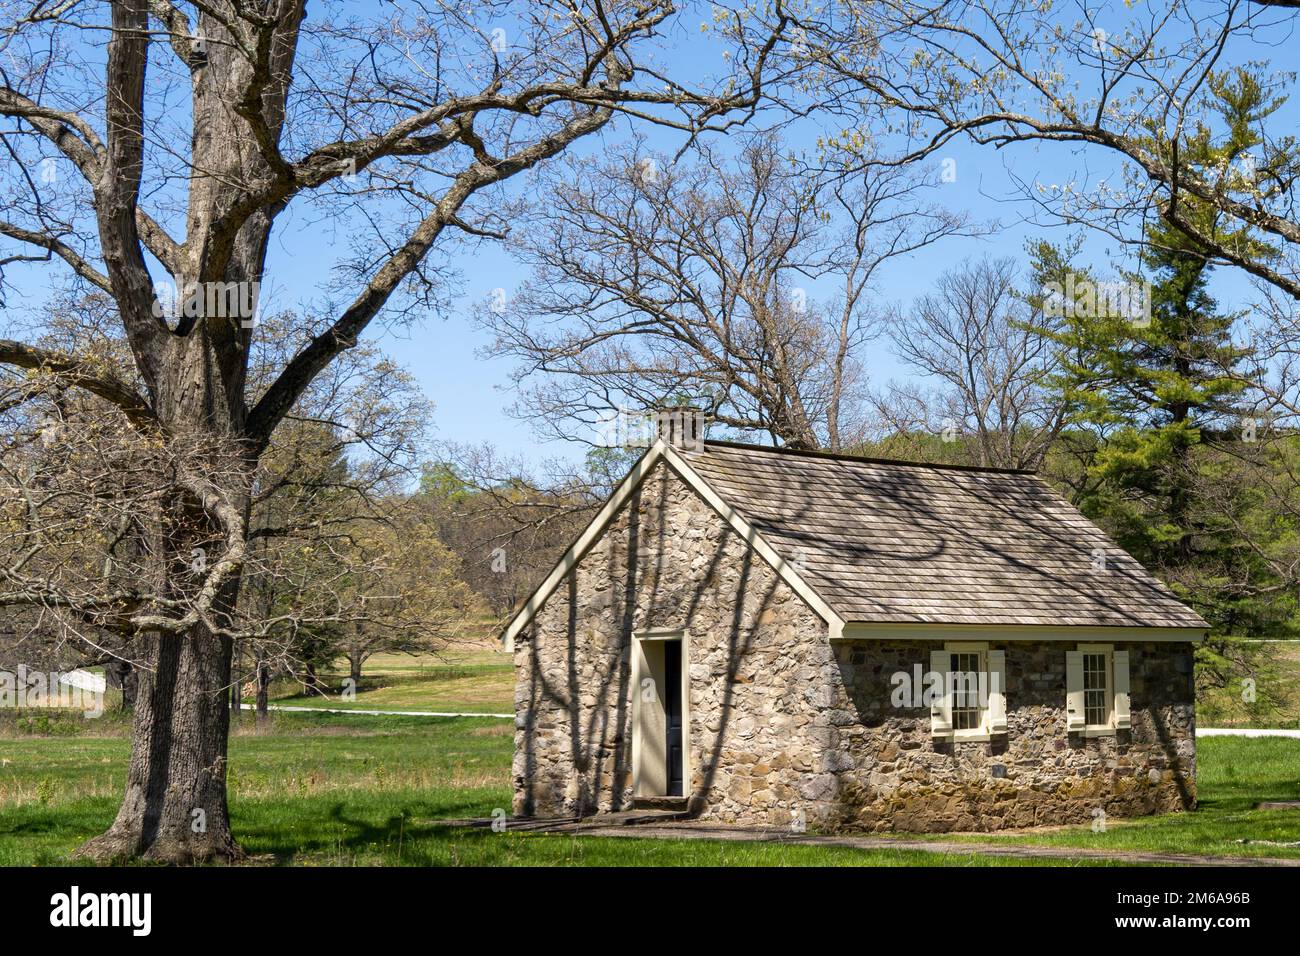 Exterior of Letitia Penn Schoolhouse a stone one-room schoolhouse at Valley Forge National Historical Park, Pennsylvania Stock Photo